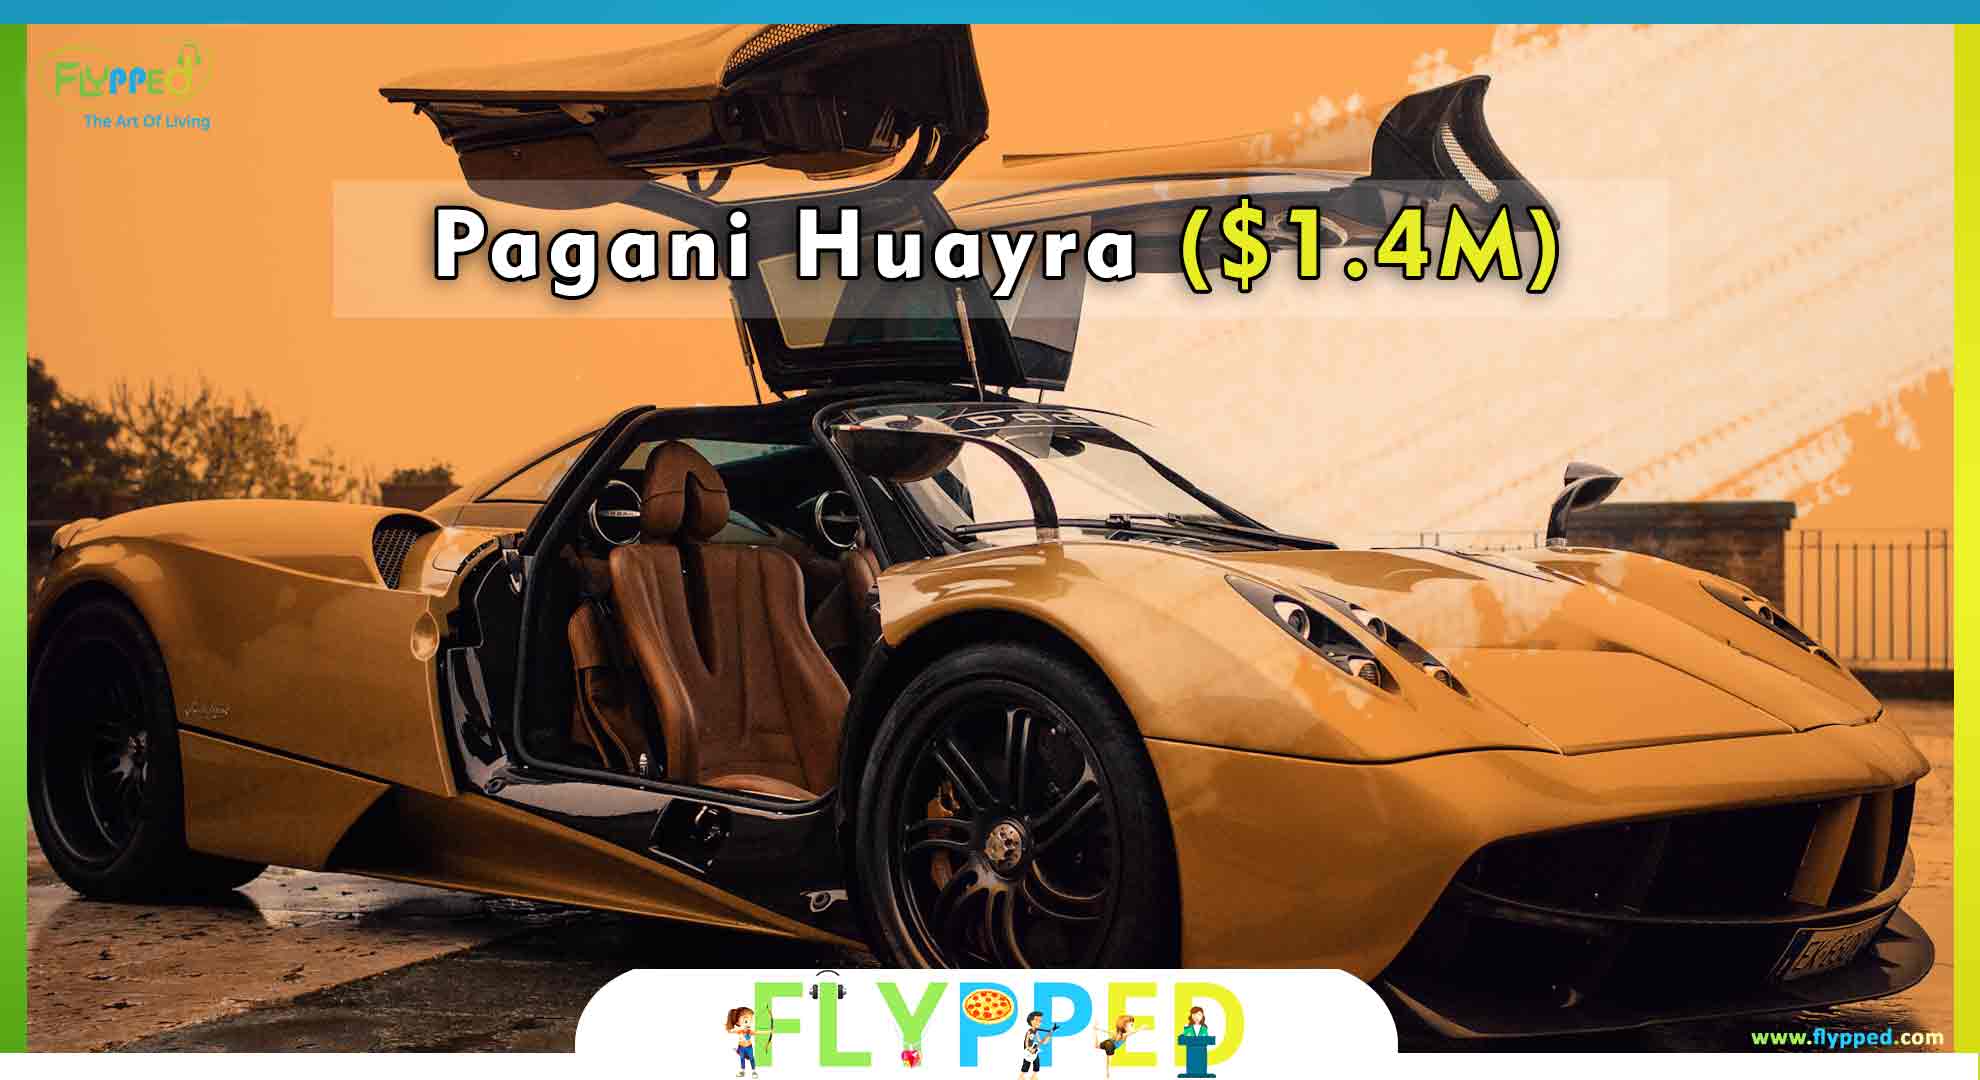 Top-10-most-expensive-cars-in-the-world-Pagani-Huayra